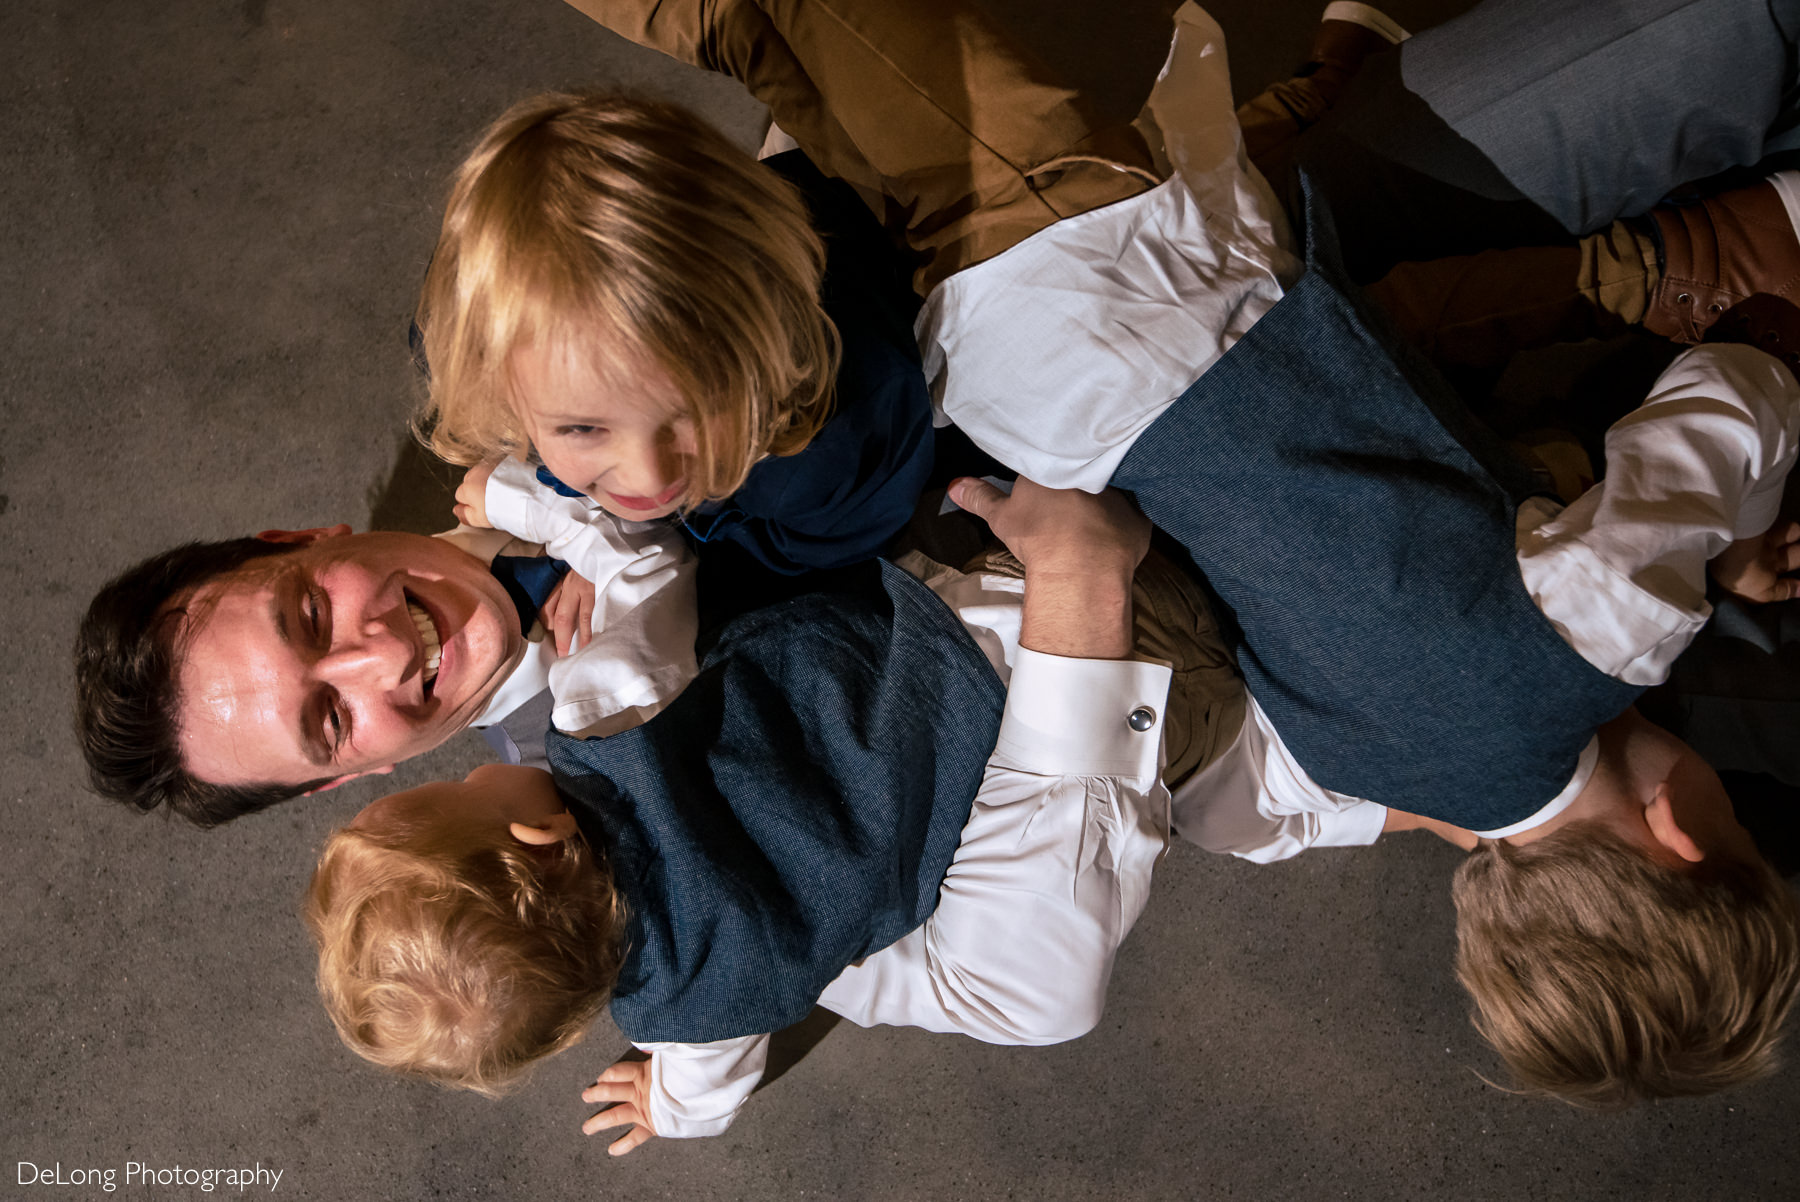 Man being dog-piled by children at Childress Vineyards by Charlotte Wedding Photographers DeLong Photography